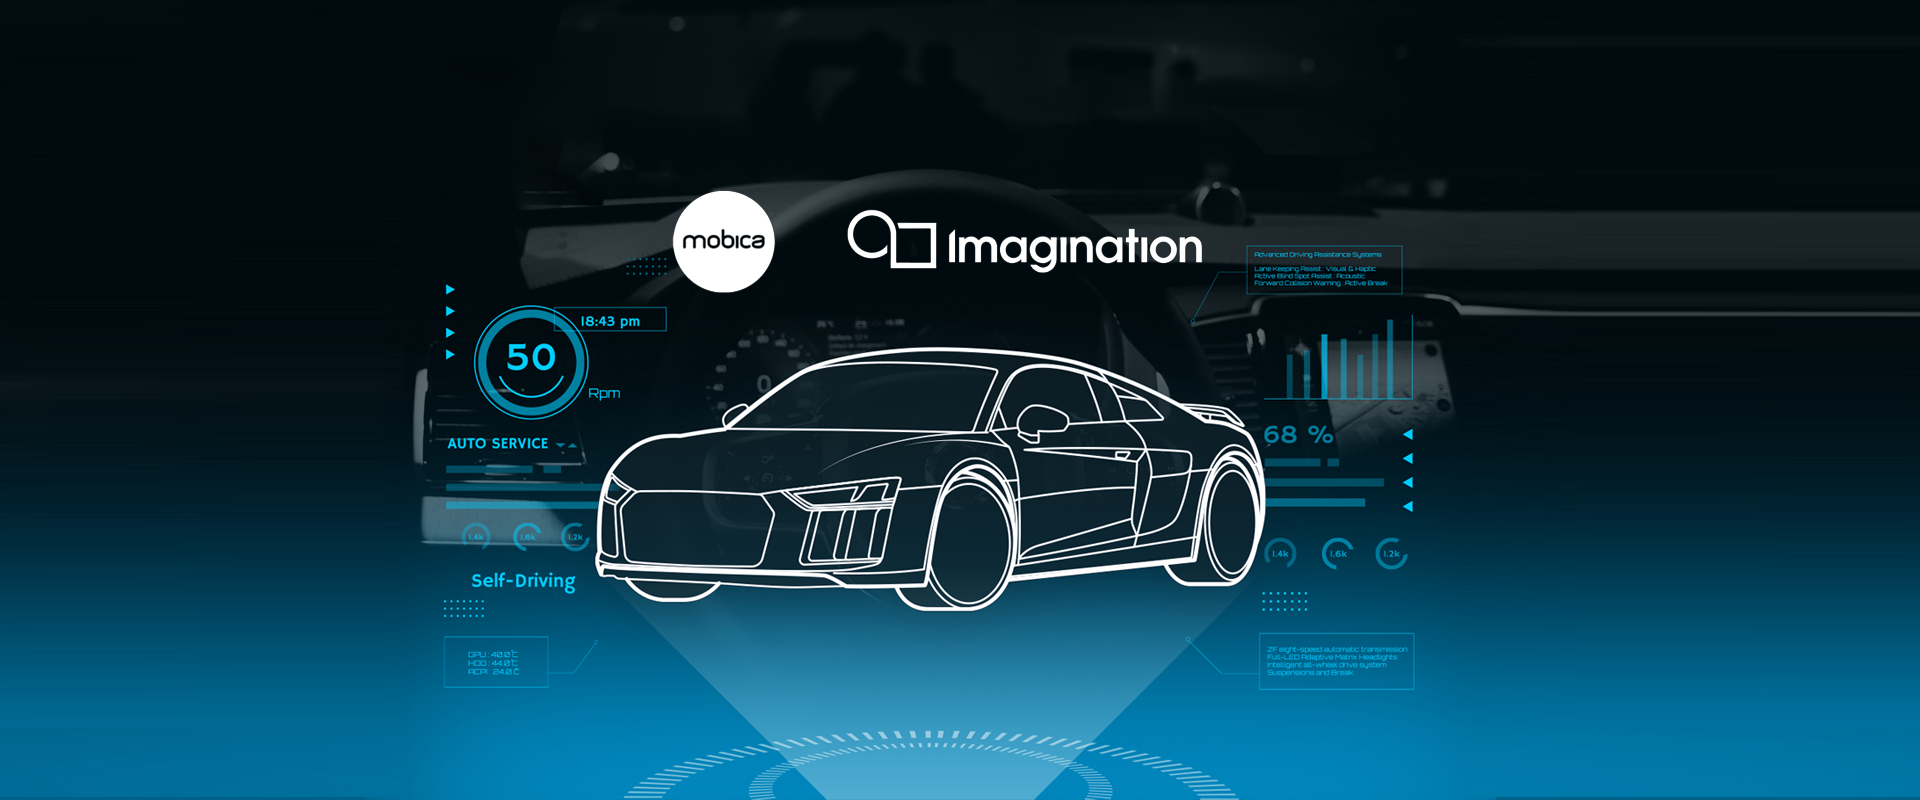 Imagination and Mobica partner to create virtualized automotive environment